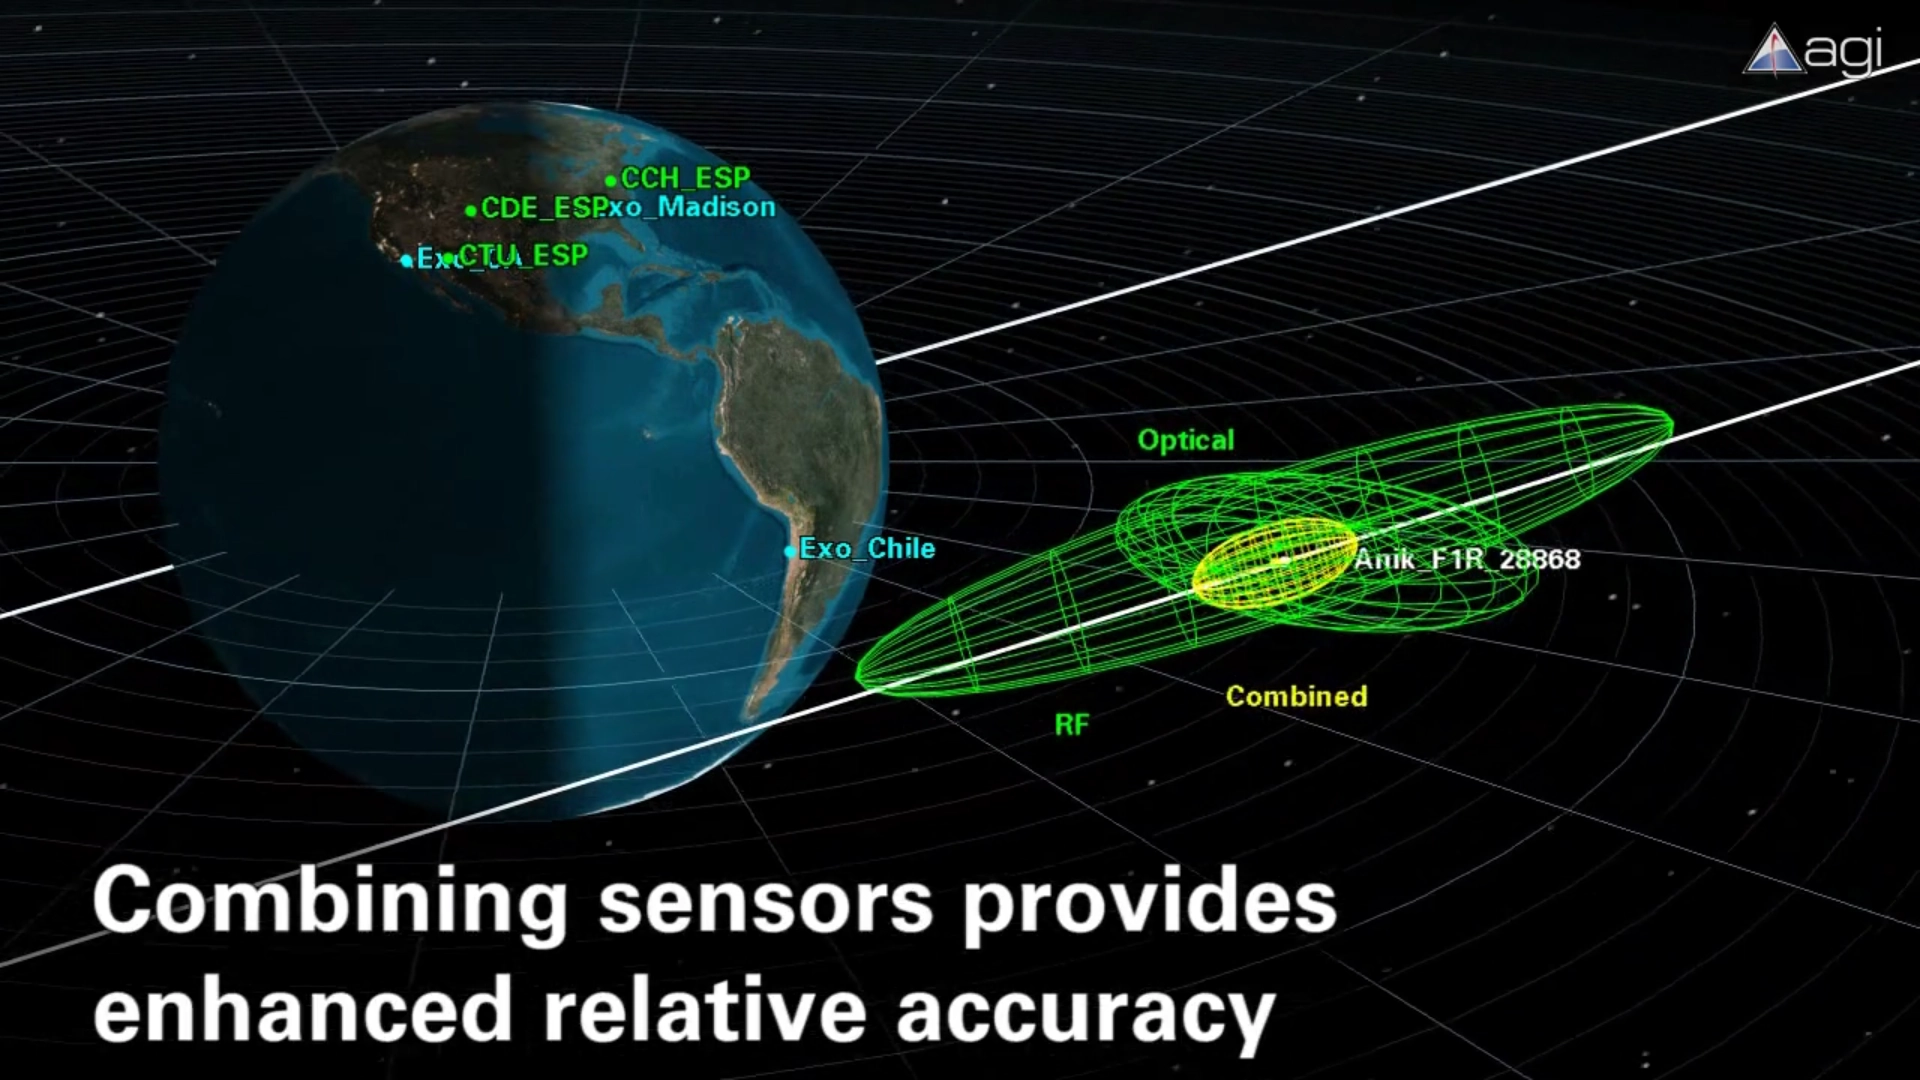 Combining Sensors for Greater Positioning Accuracy